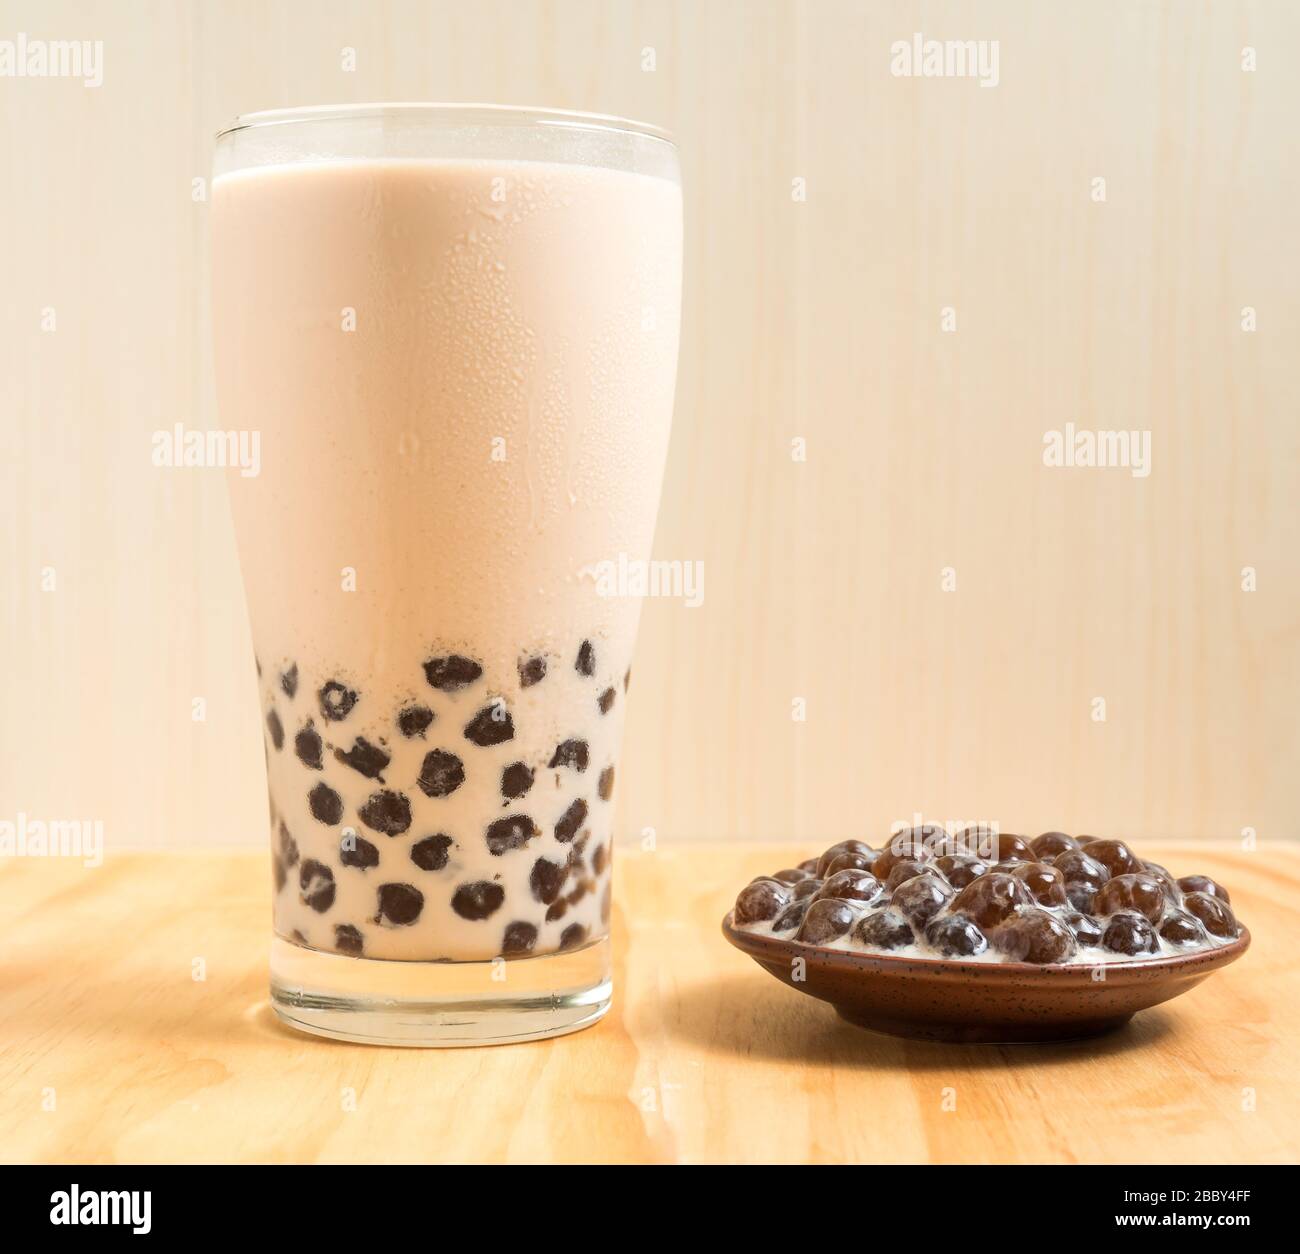 https://c8.alamy.com/comp/2BBY4FF/a-glass-cup-of-pearl-milk-tea-also-called-bubble-tea-and-a-plate-of-tapioca-ball-on-wooden-background-pearl-milk-tea-is-the-most-representative-dri-2BBY4FF.jpg